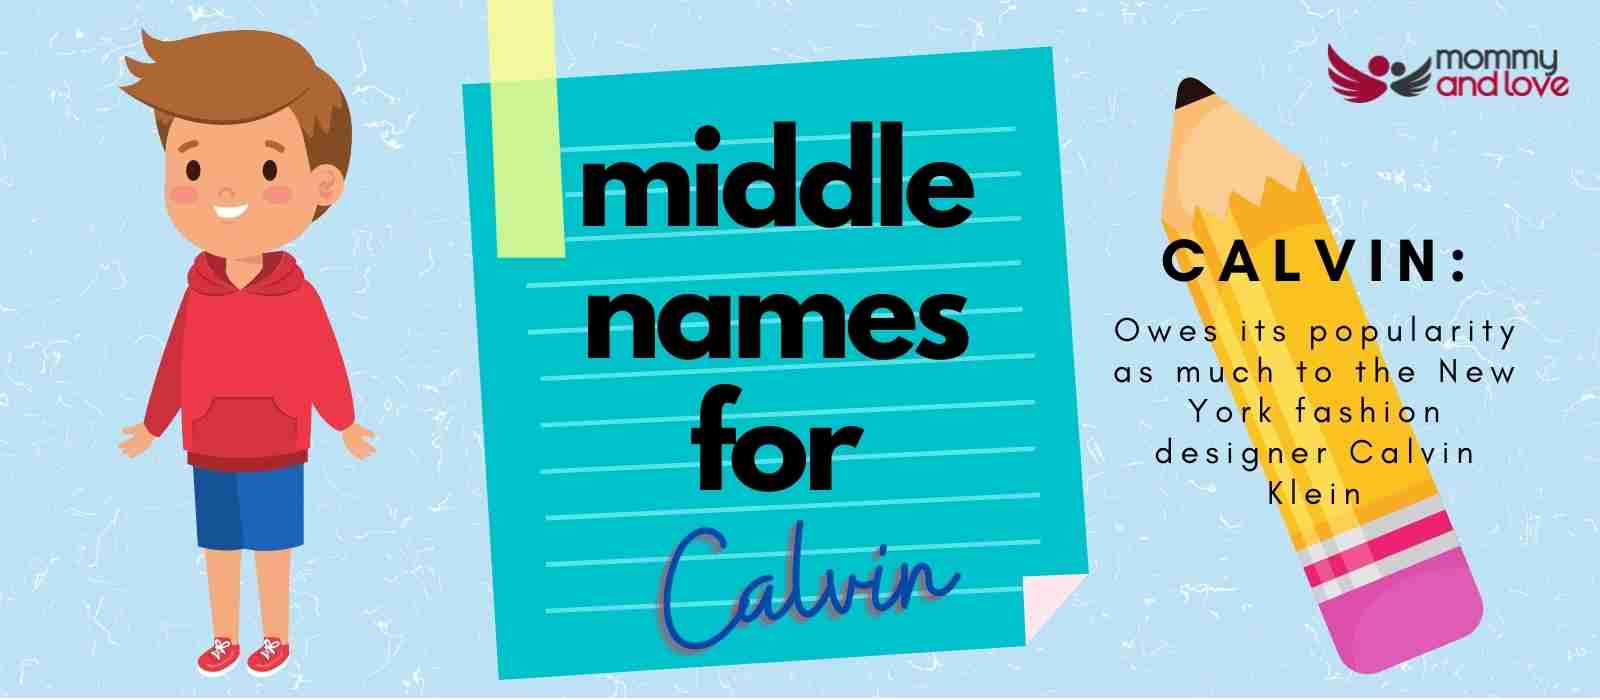 Middle Names for Calvin